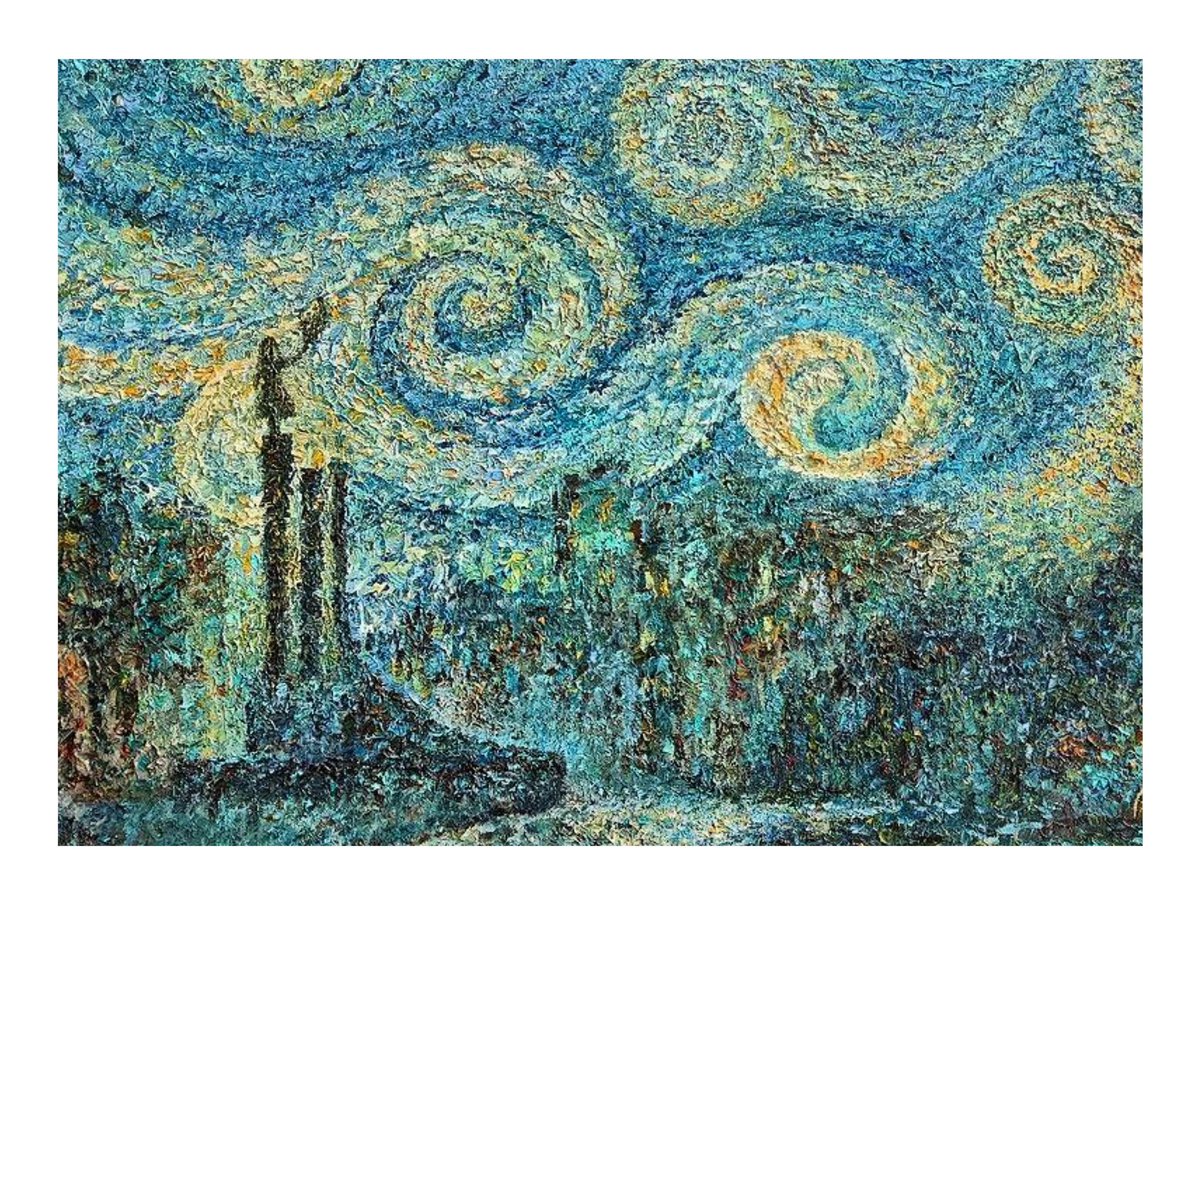 A #dreamy highlight set to shine in tonight’s 🇺🇦 auction! (Lot 41) To view this starry piece, head to: Ukrainian Catholic Cathedral, Duke St, London W1K 5BQ today from 4.30pm! 🥂#charityauction #placeyourbids #ukraine